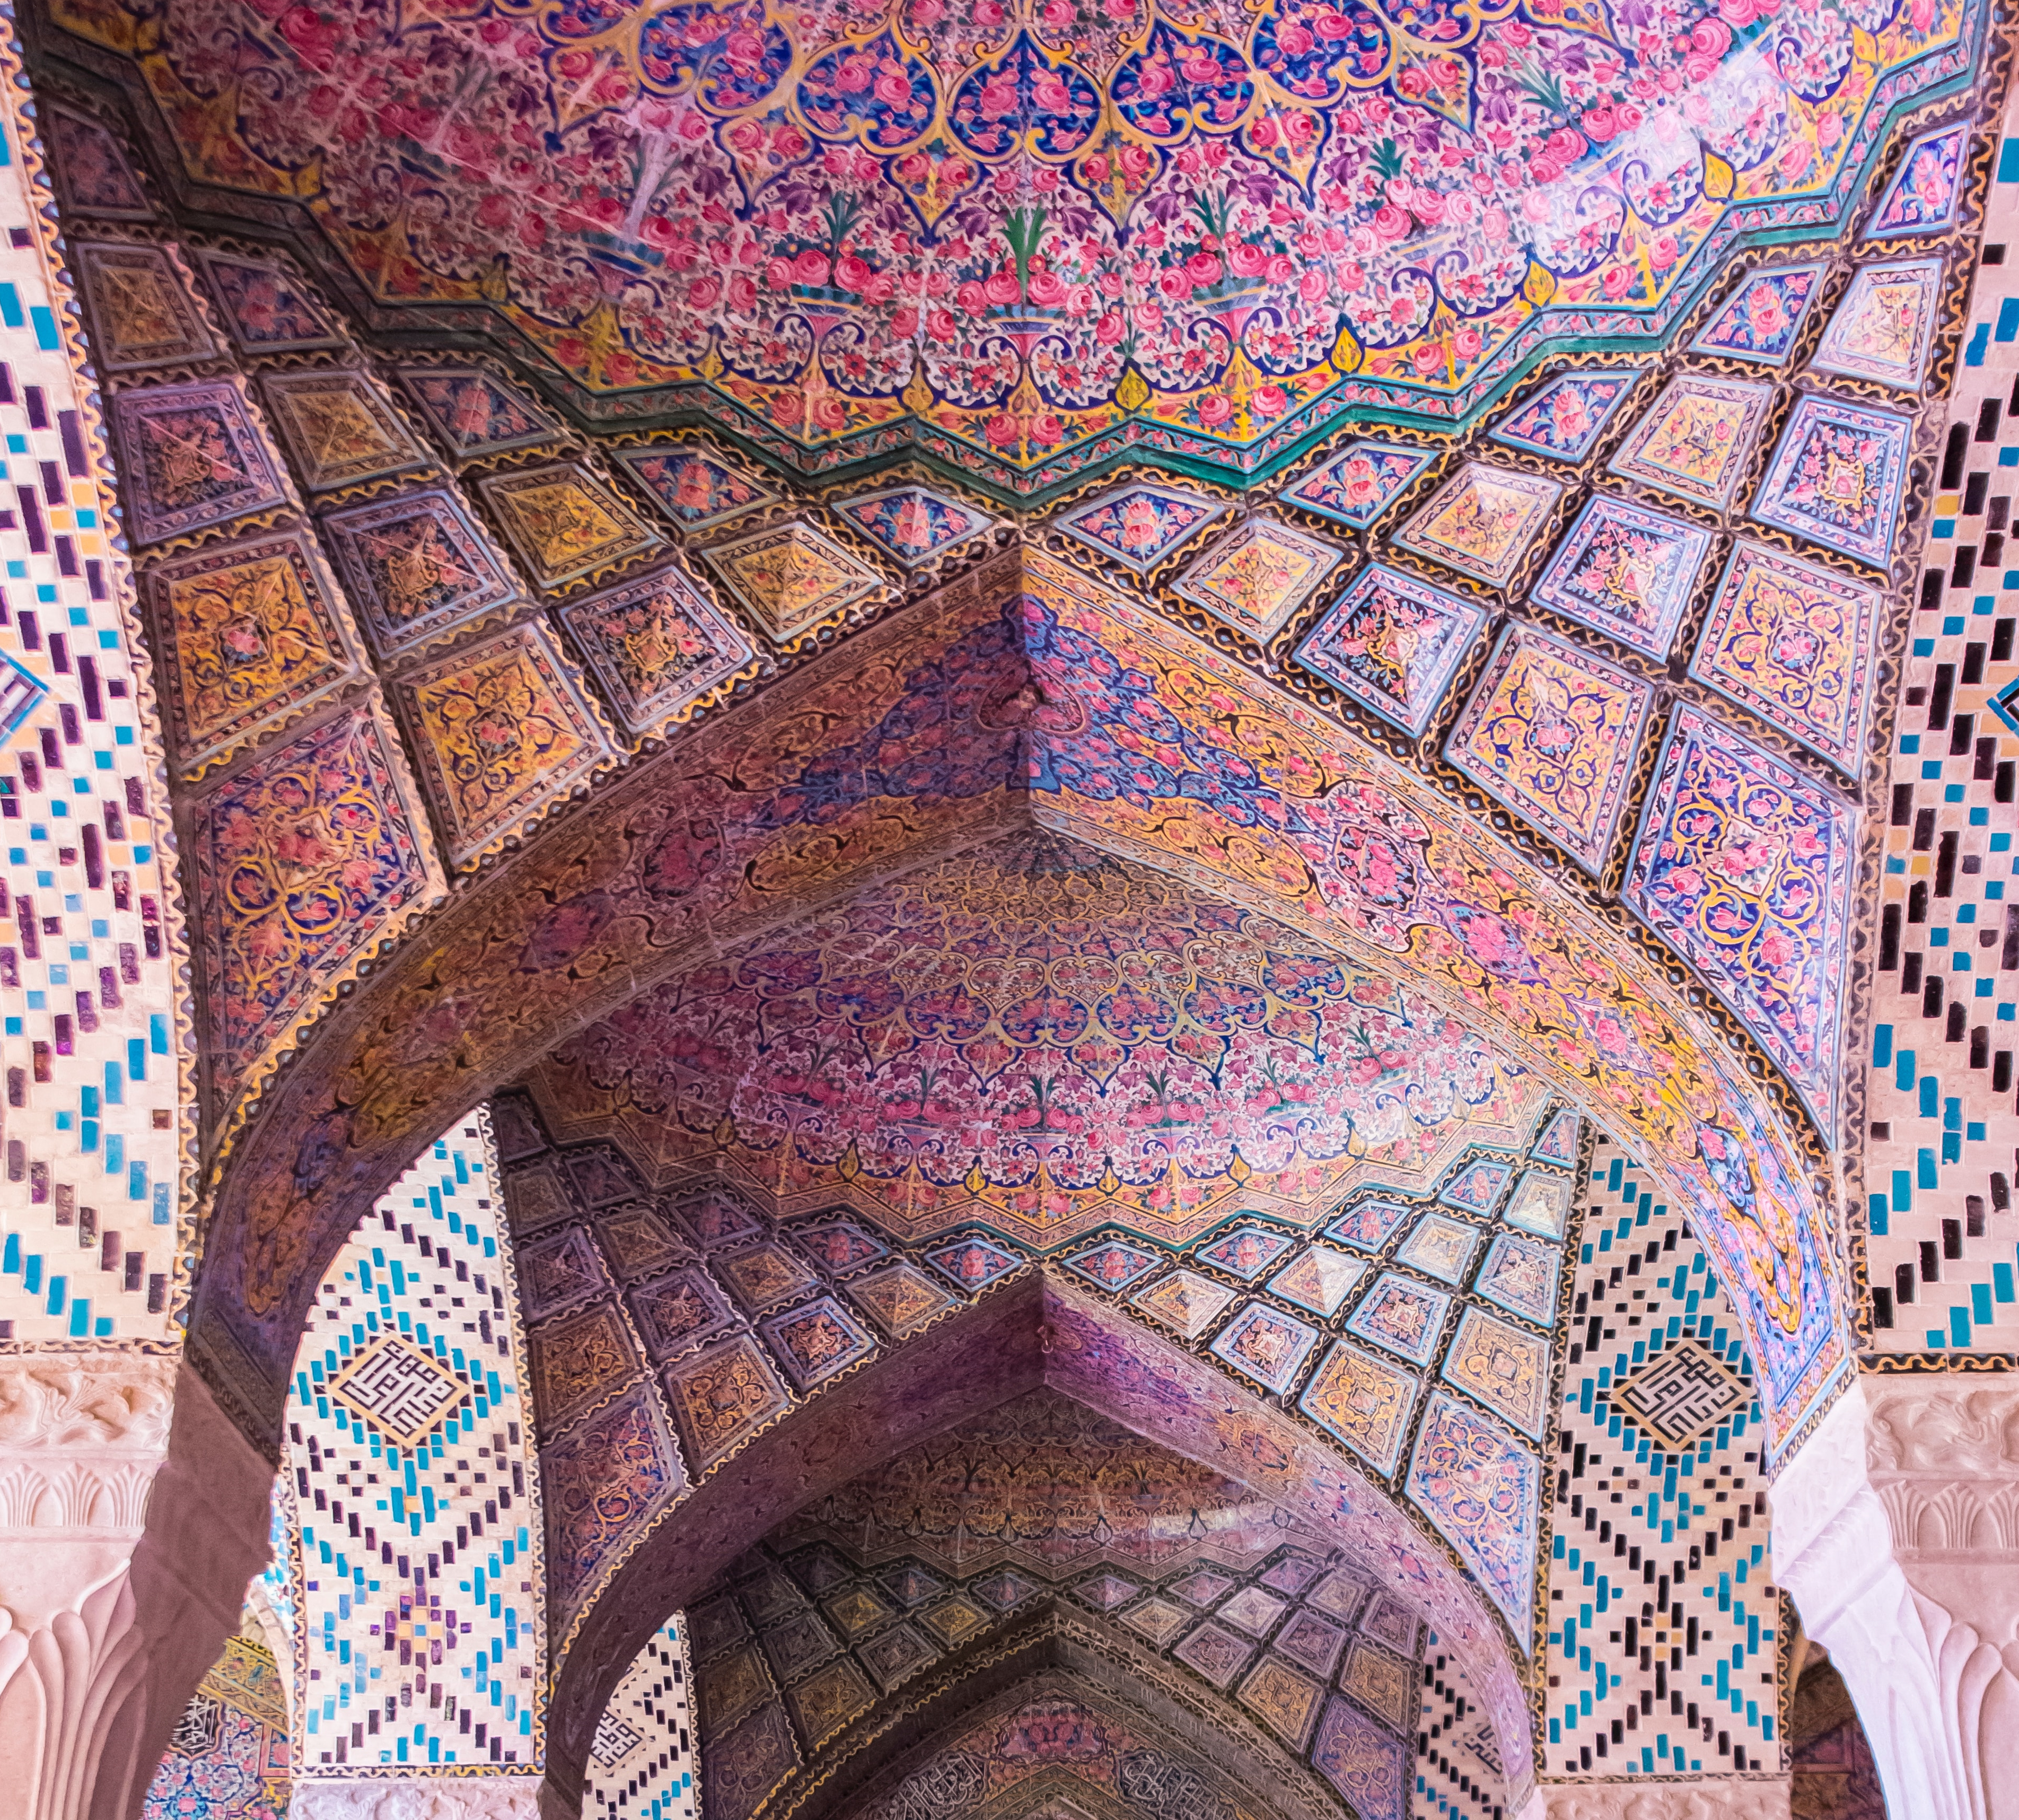 A photograph of an intricately painted vaulted ceiling, as found in old temples, cathedrals and synagogues. Dominant colors are pink and purples with golden yellow and blue. Photograph taken by Faruk Kaymak.